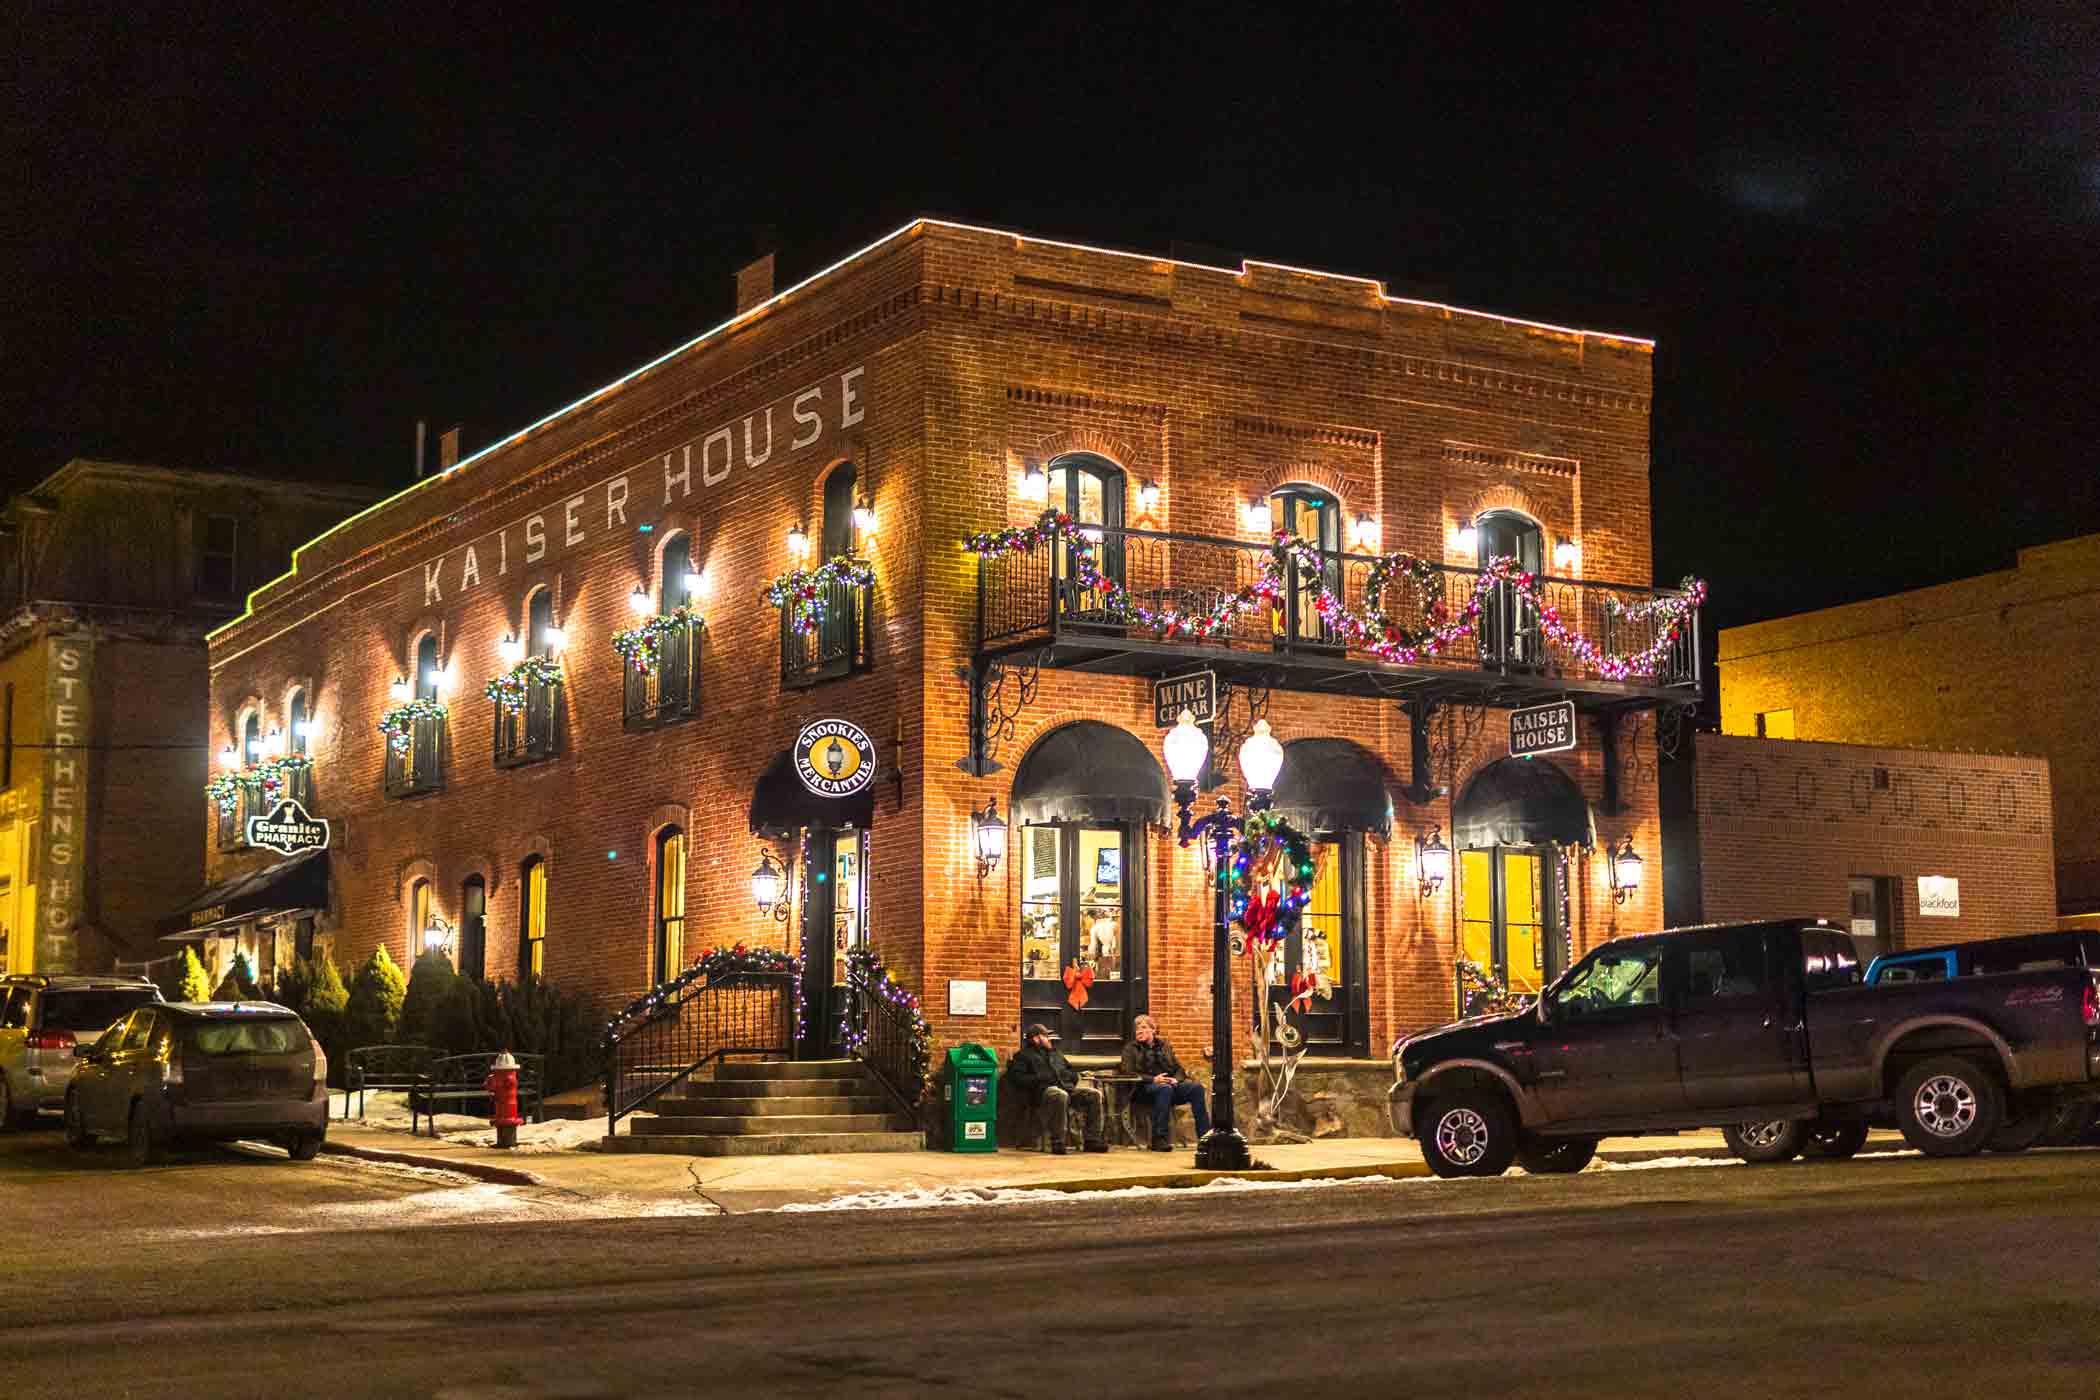 The Kaiser House decorated for the holidays in the snow in Philipsburg, Montana.